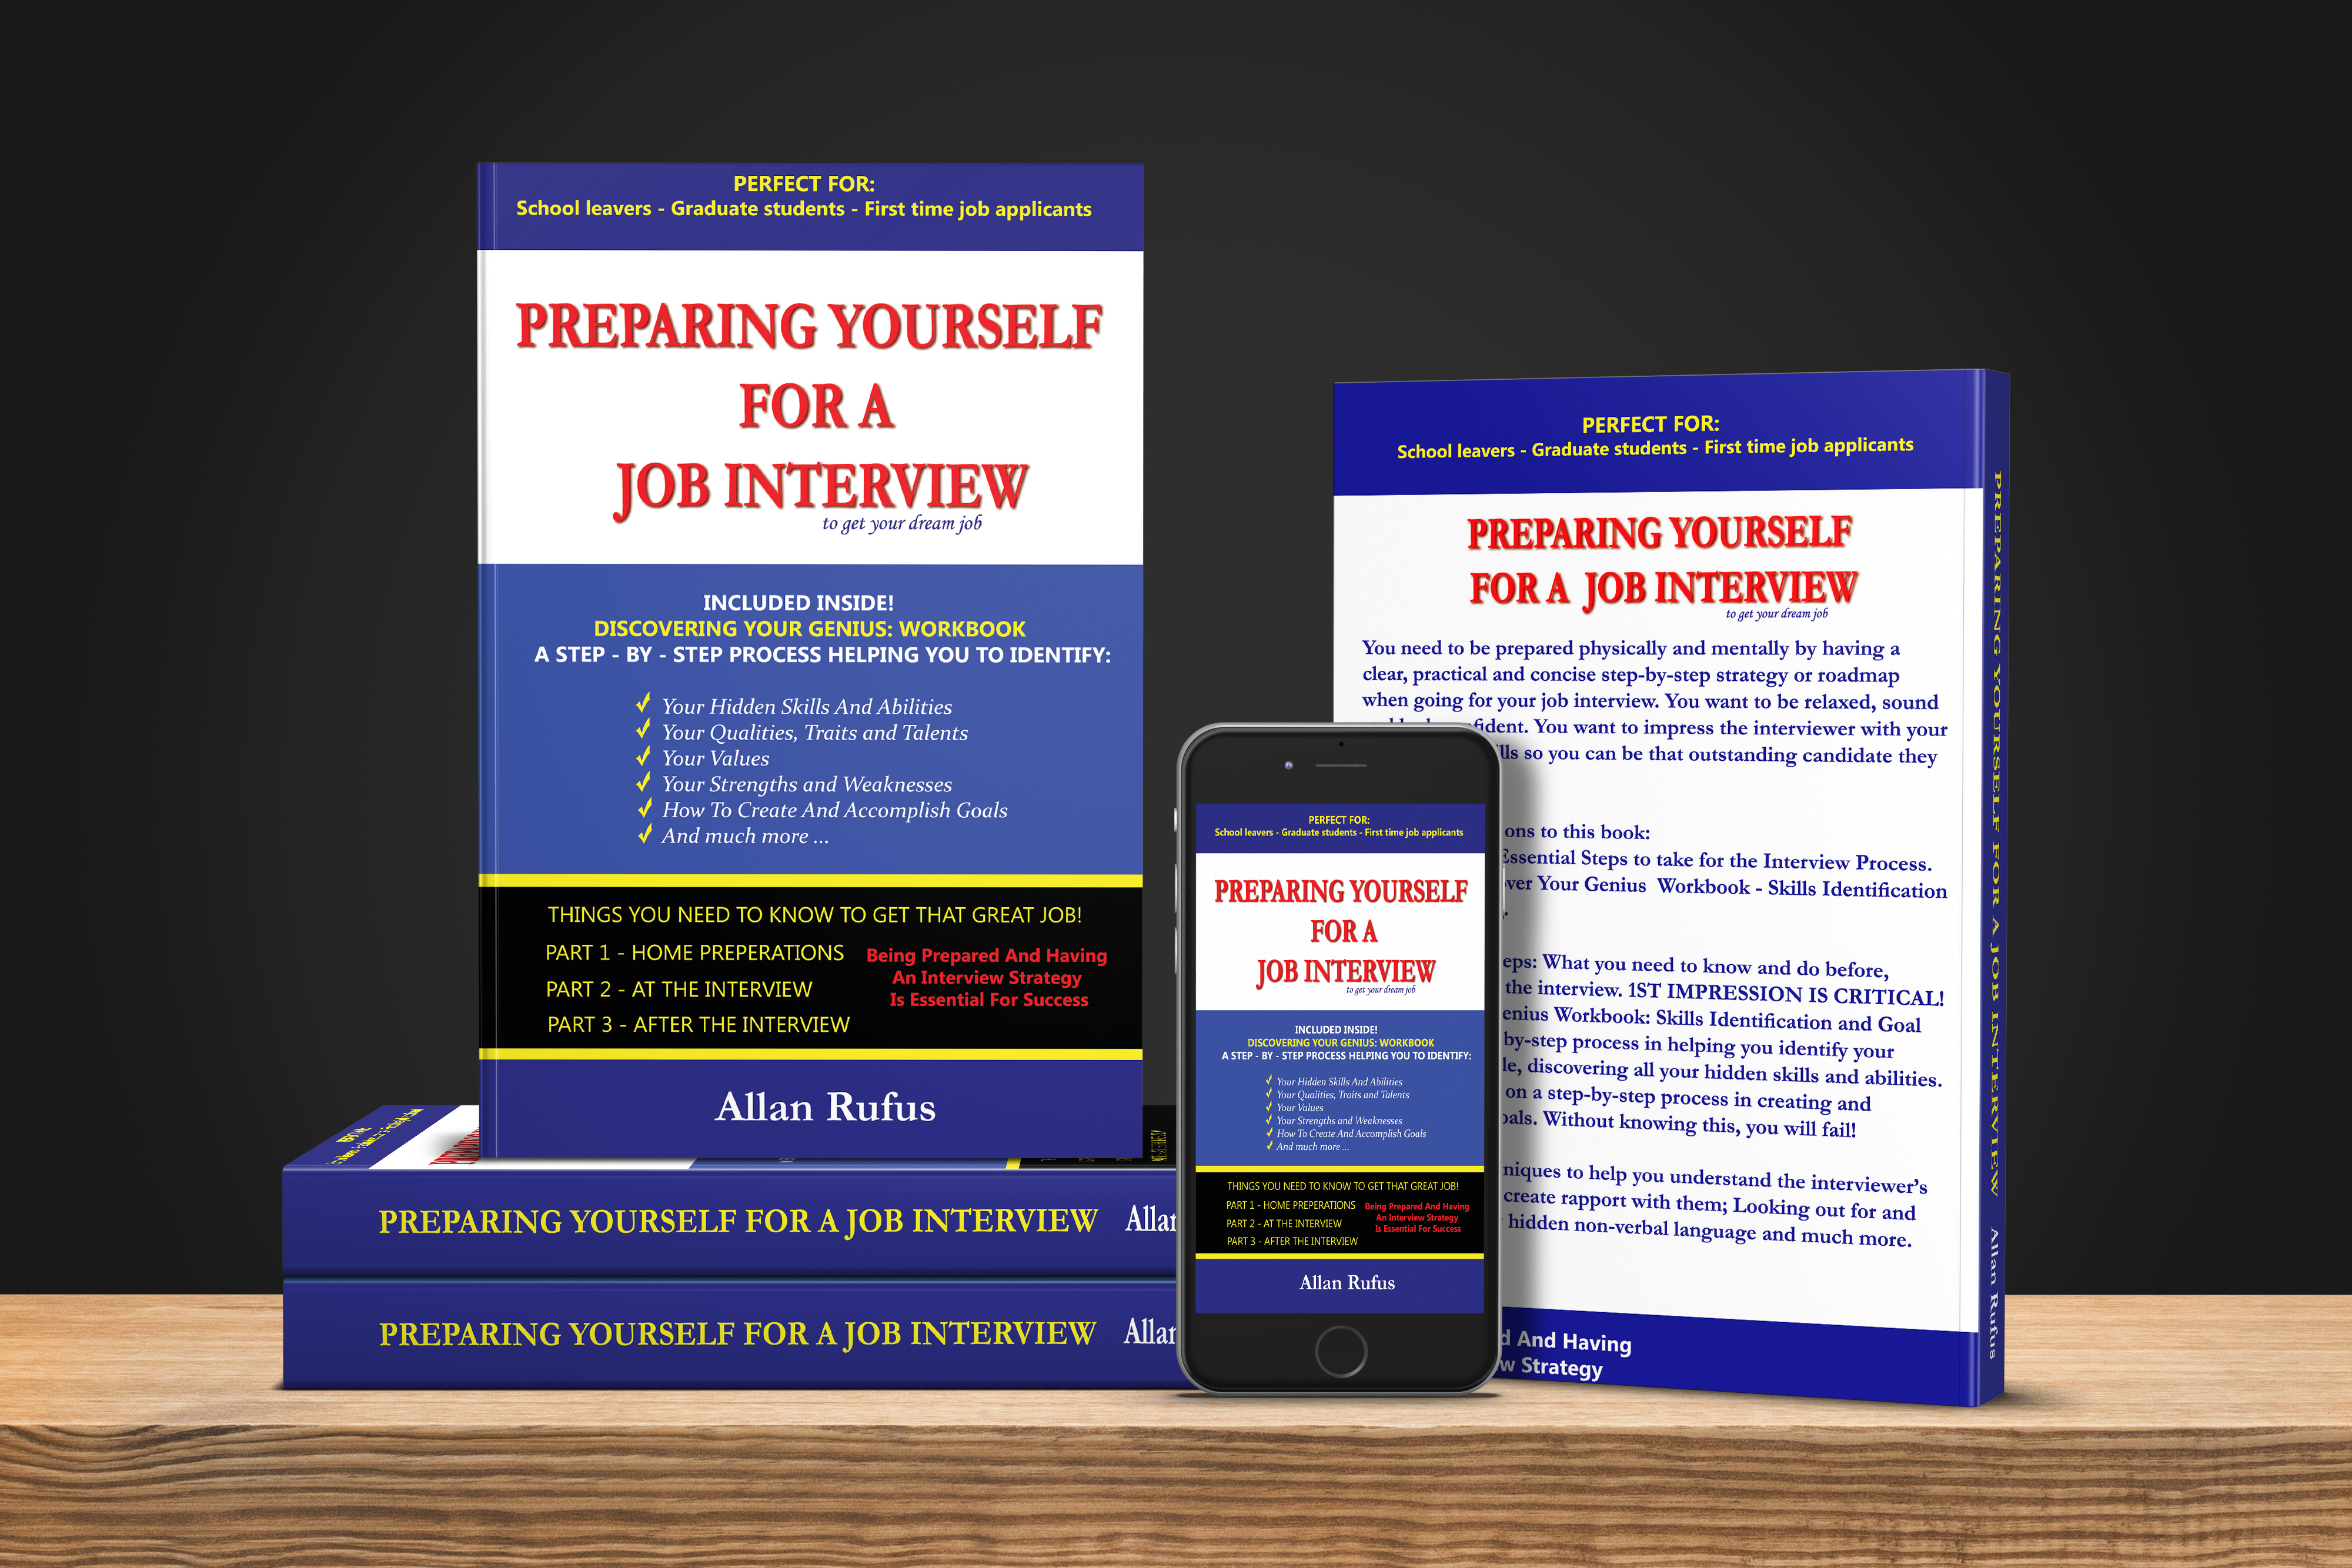 Preparing Yourself For A Job Interview Book and Ebook by Allan Rufus